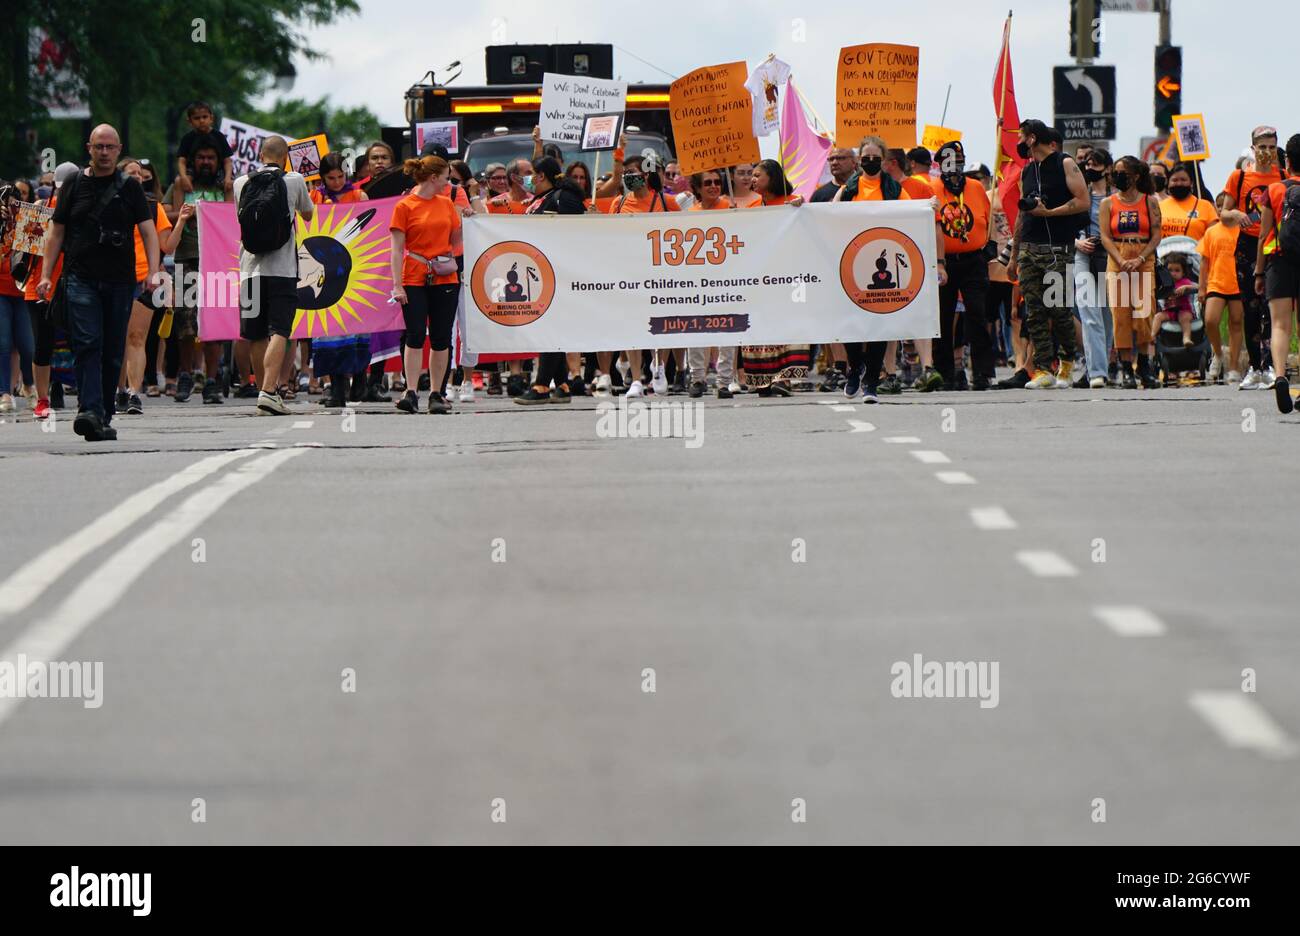 Montreal,Quebec,Canada,July 1, 2021.Start of the protest march to pay respects to the indigenous culture.Mario Beauregard/Alamy News Stock Photo